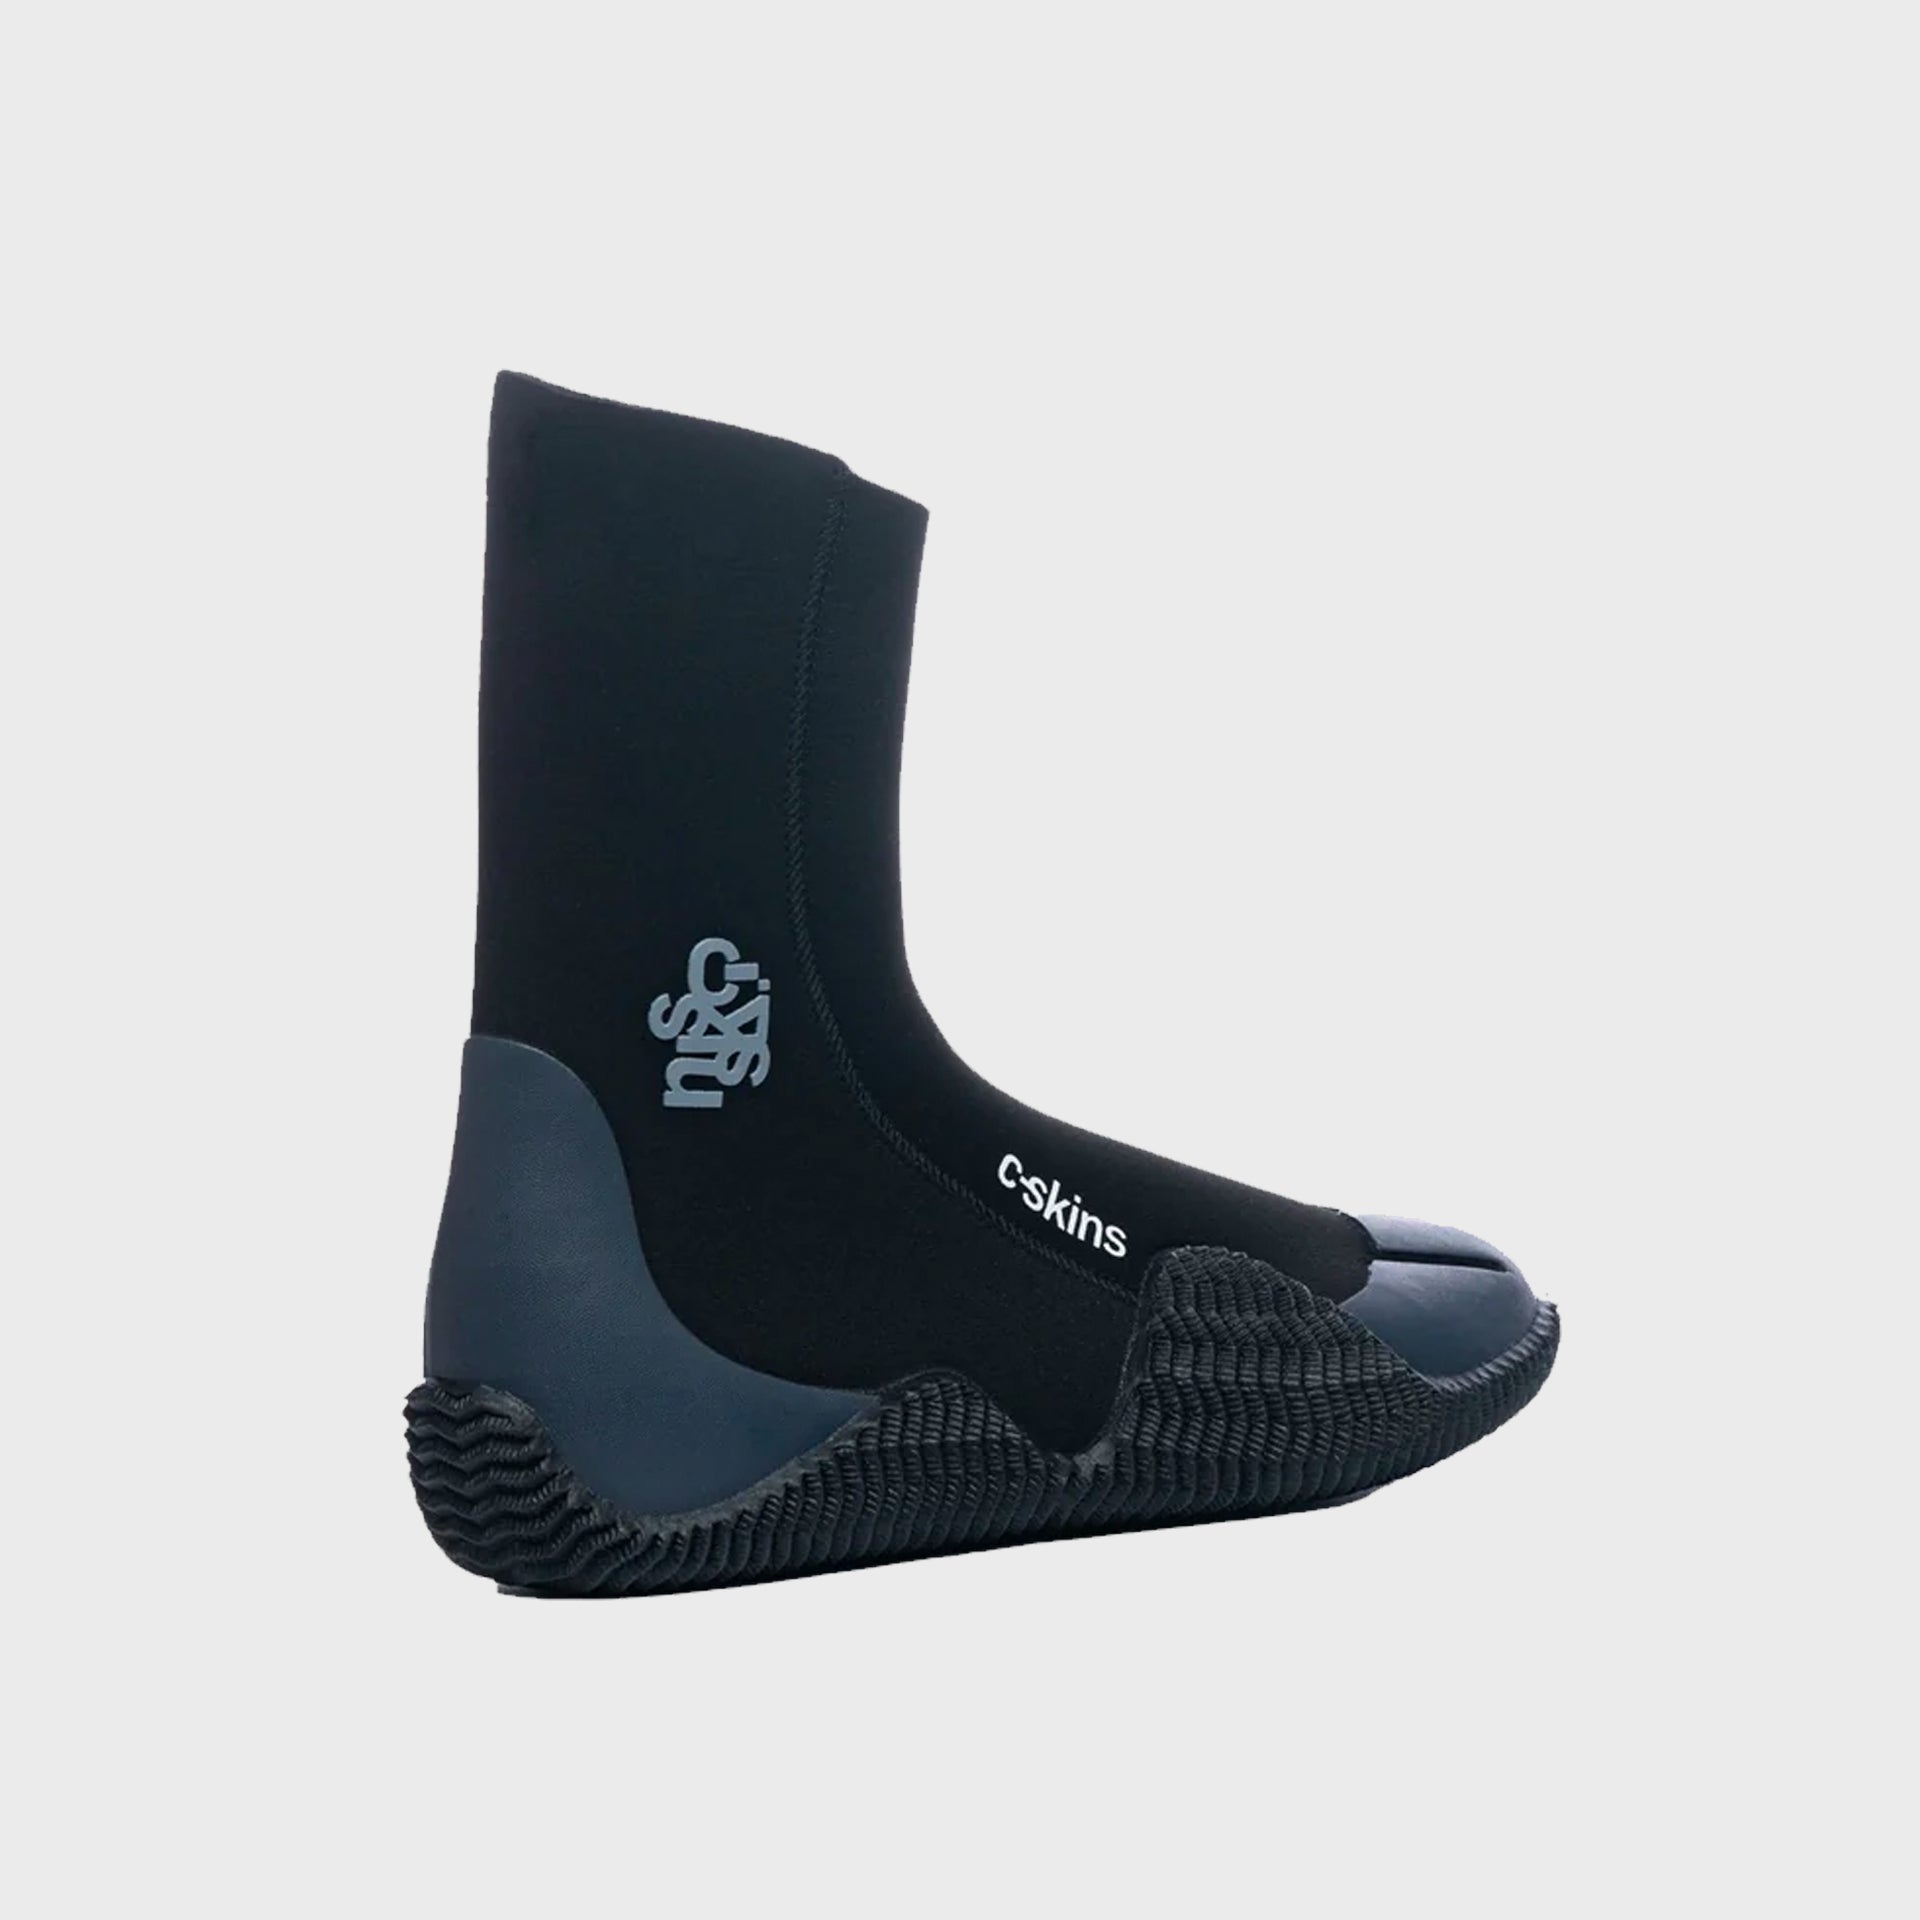 C-Skins Legend 5mm Adult Zipped Round Toe Boots - Black/Charcoal - ManGo Surfing